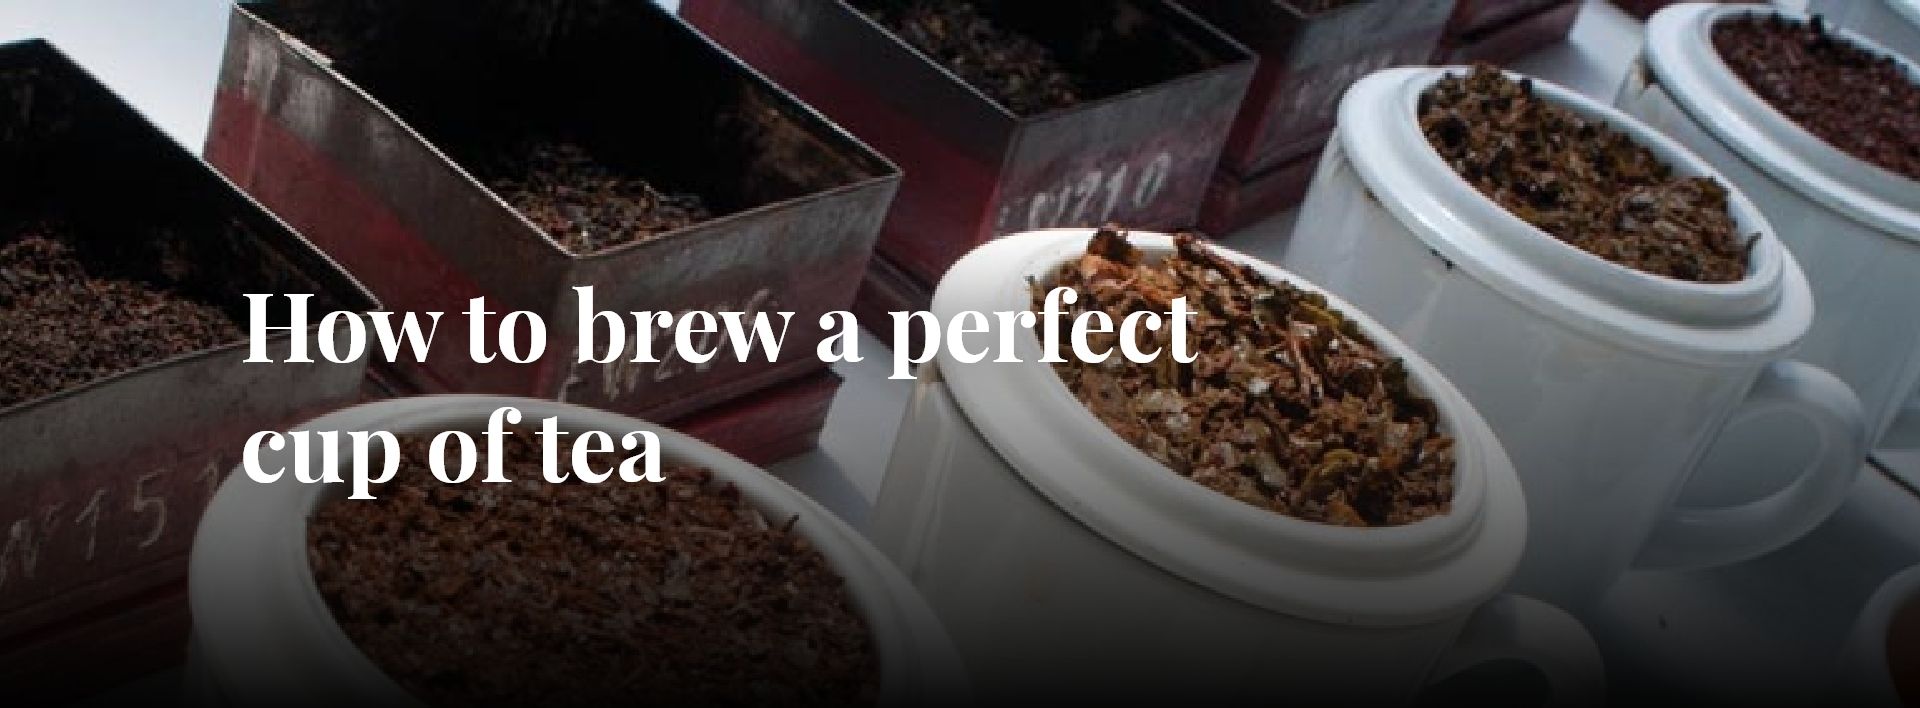 How To Make Tea  Way To Brew the Perfect Cup Of Tea